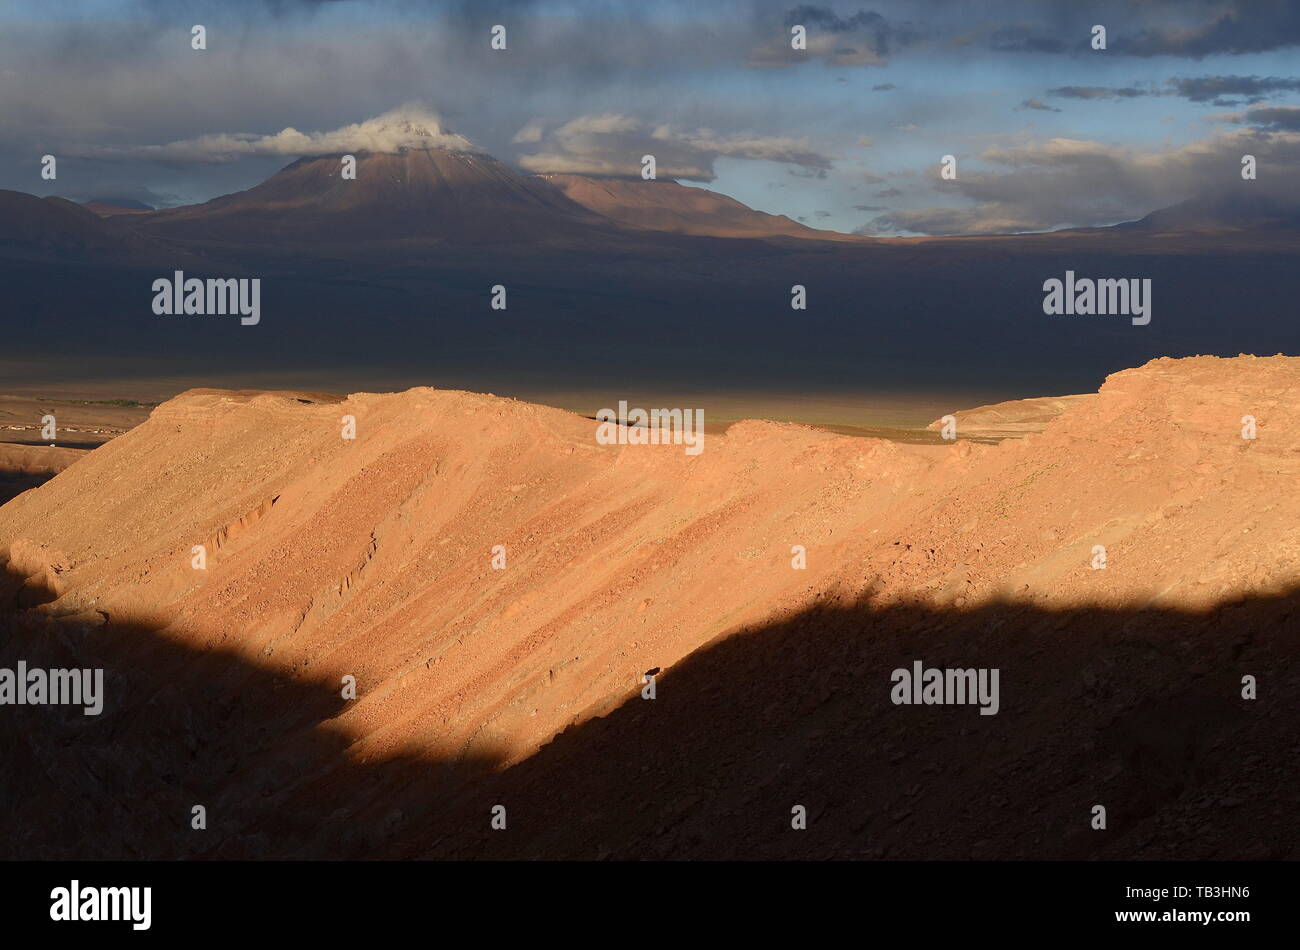 LICANCABUR AND QUIMAL VOLANOES IN THE ANDES, SEEN FROM DEATH VALLEY, CHILE. Stock Photo